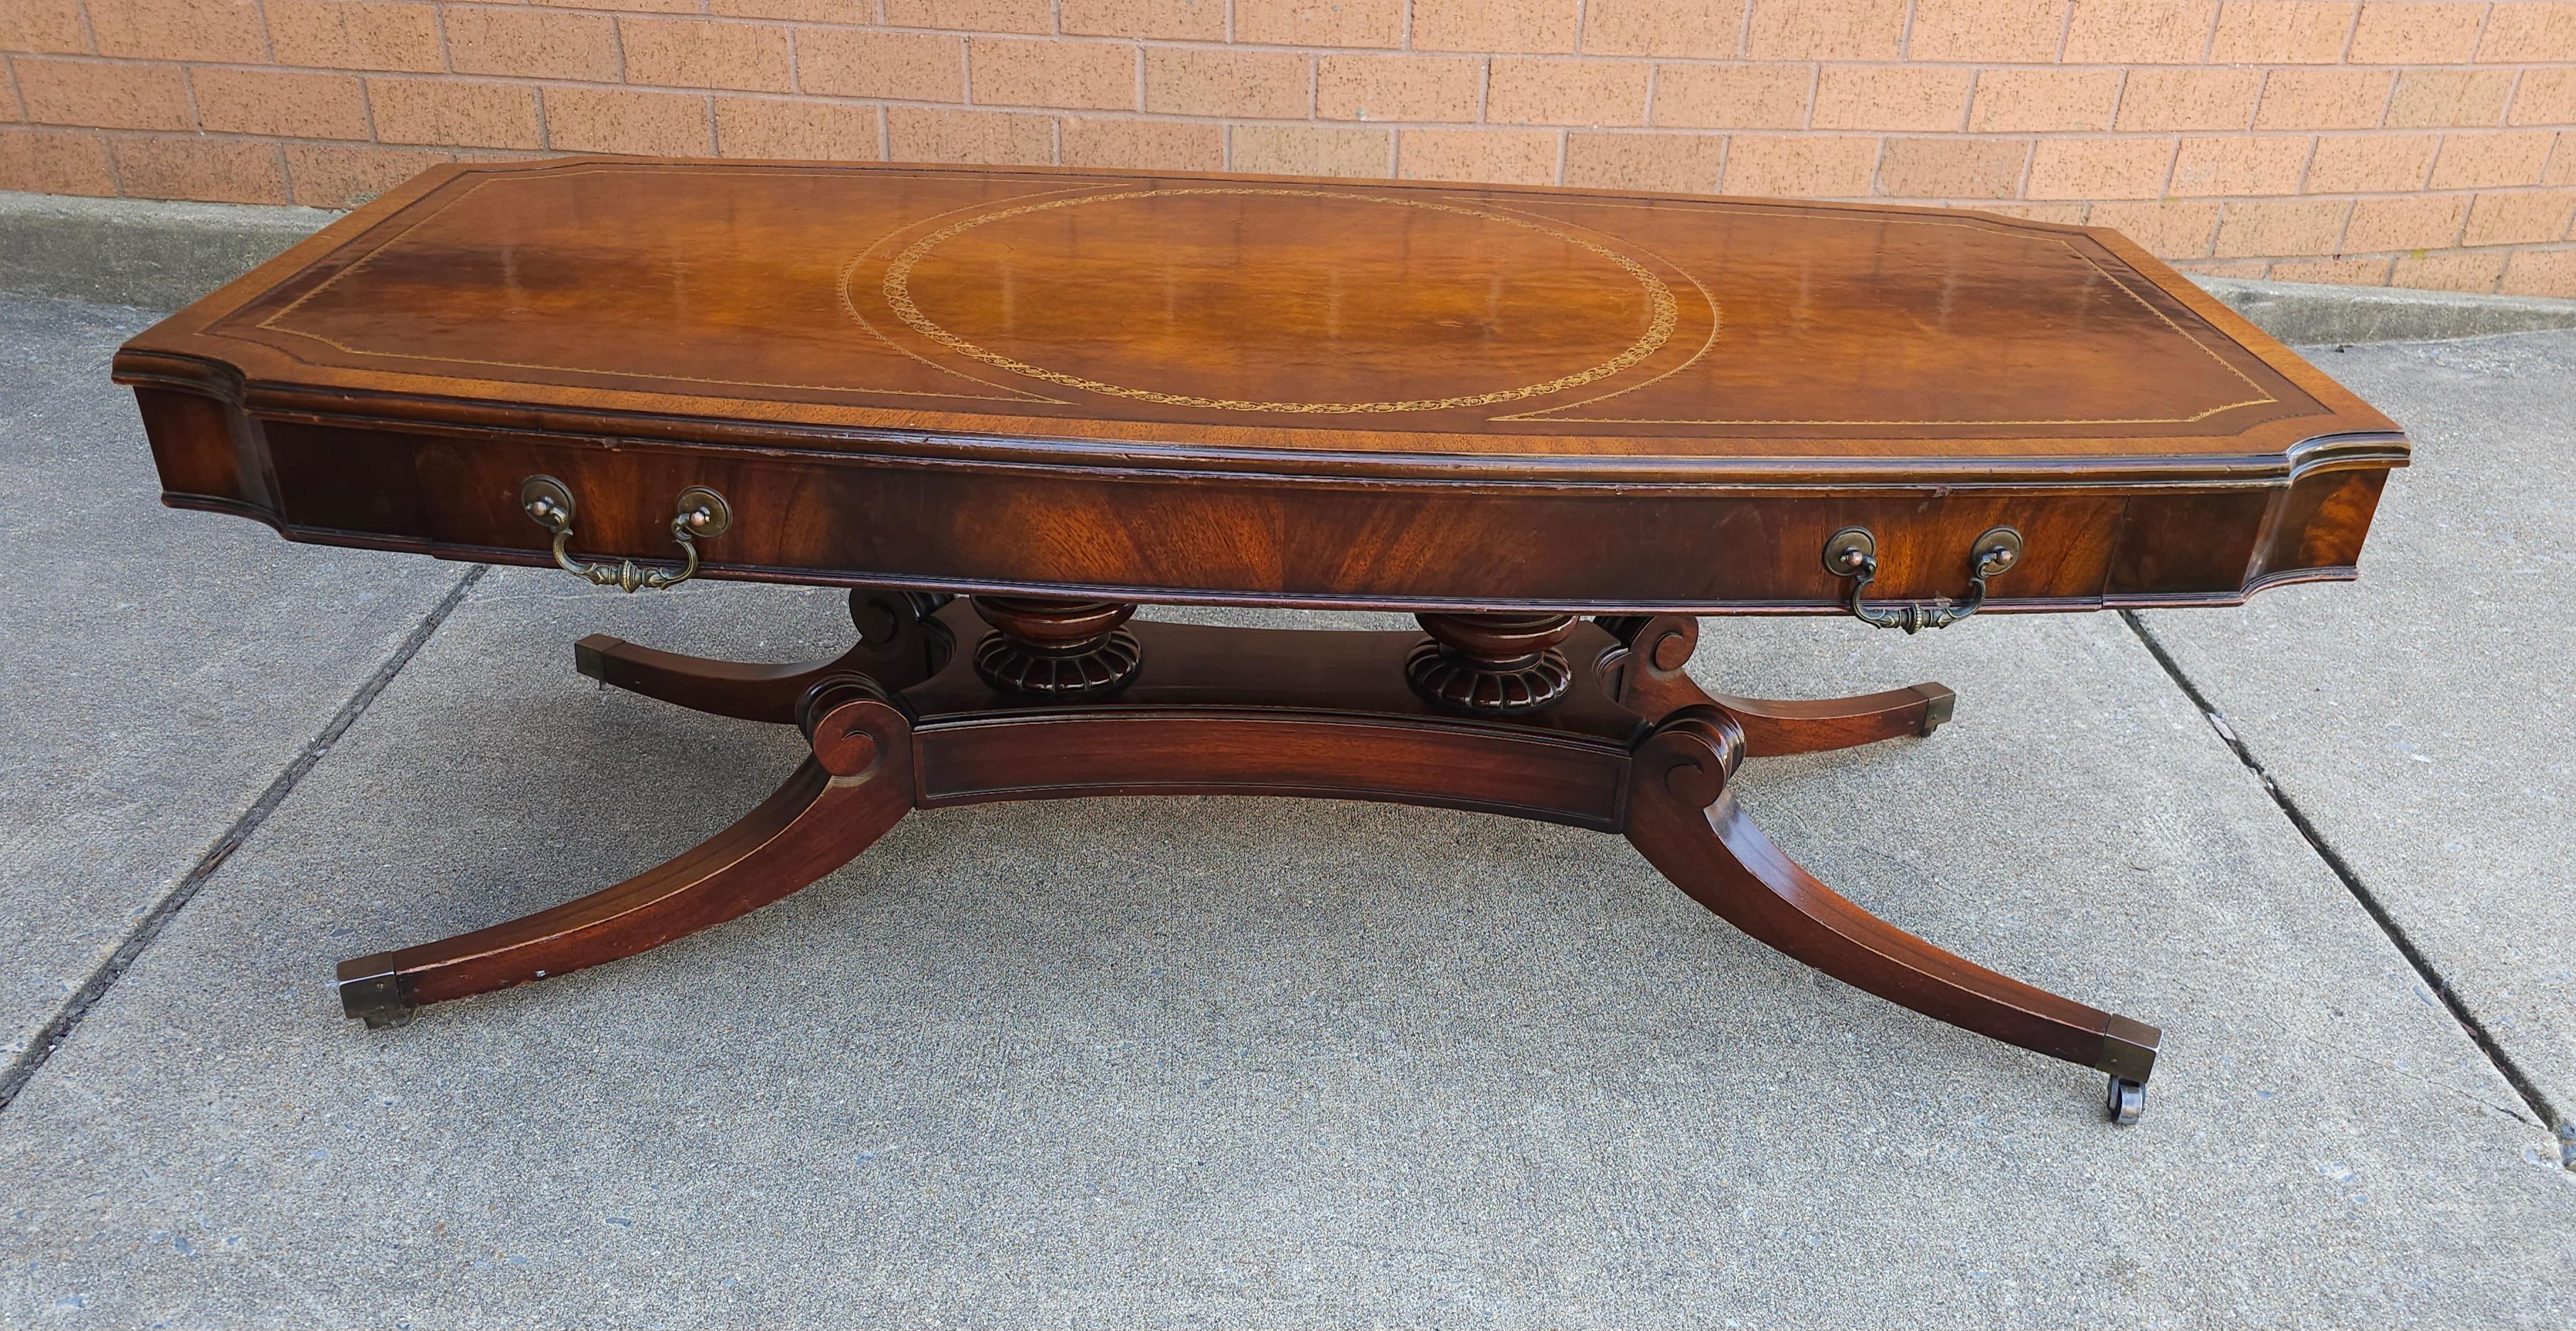 A Mid Century Regency Hollywood Mahogany Inset Leather Top Coffee Table with protective glass top. Measures 46